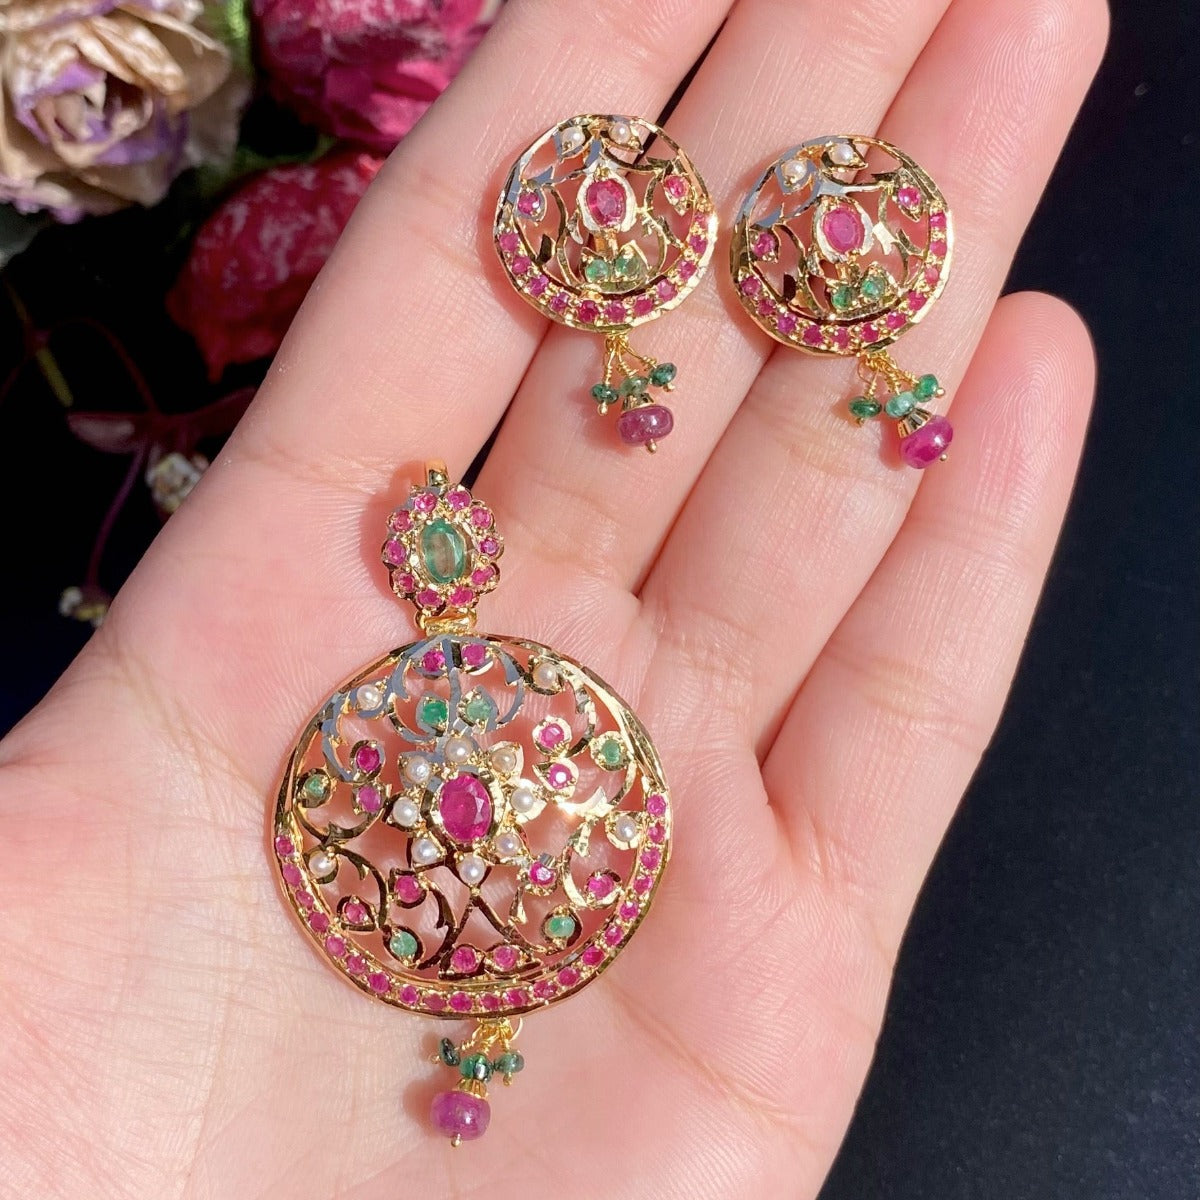 Shop Gold Pendant and Earring Sets